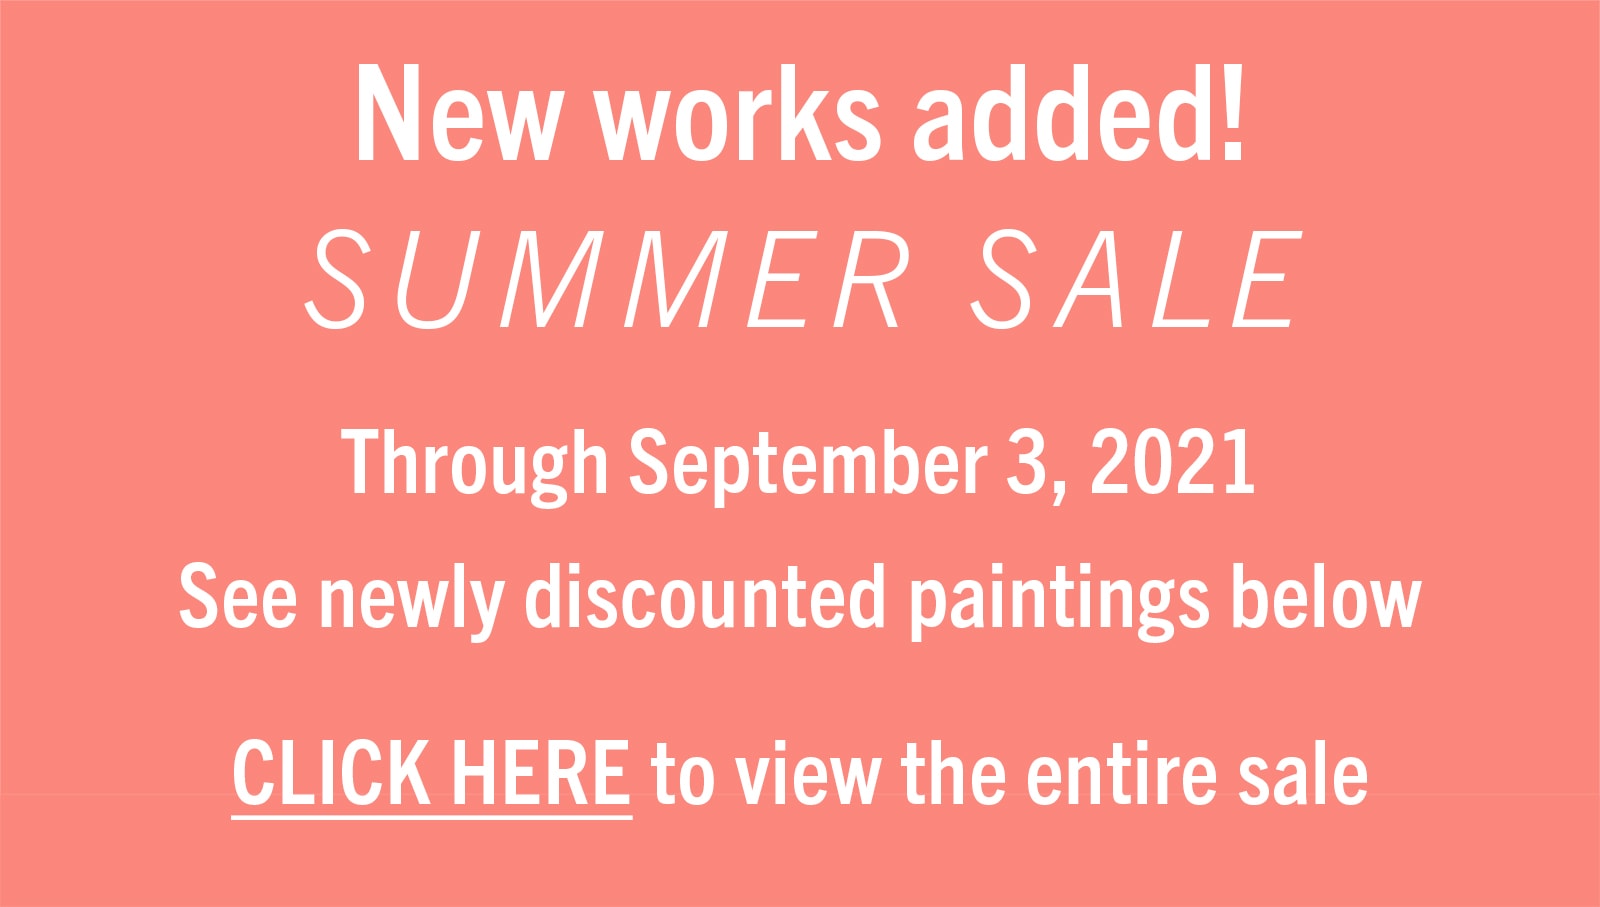 NEW WORKS ADDED! Summer Sale through September 3, 2021. See newly discounted paintings below. CLICK HERE to view the entire sale